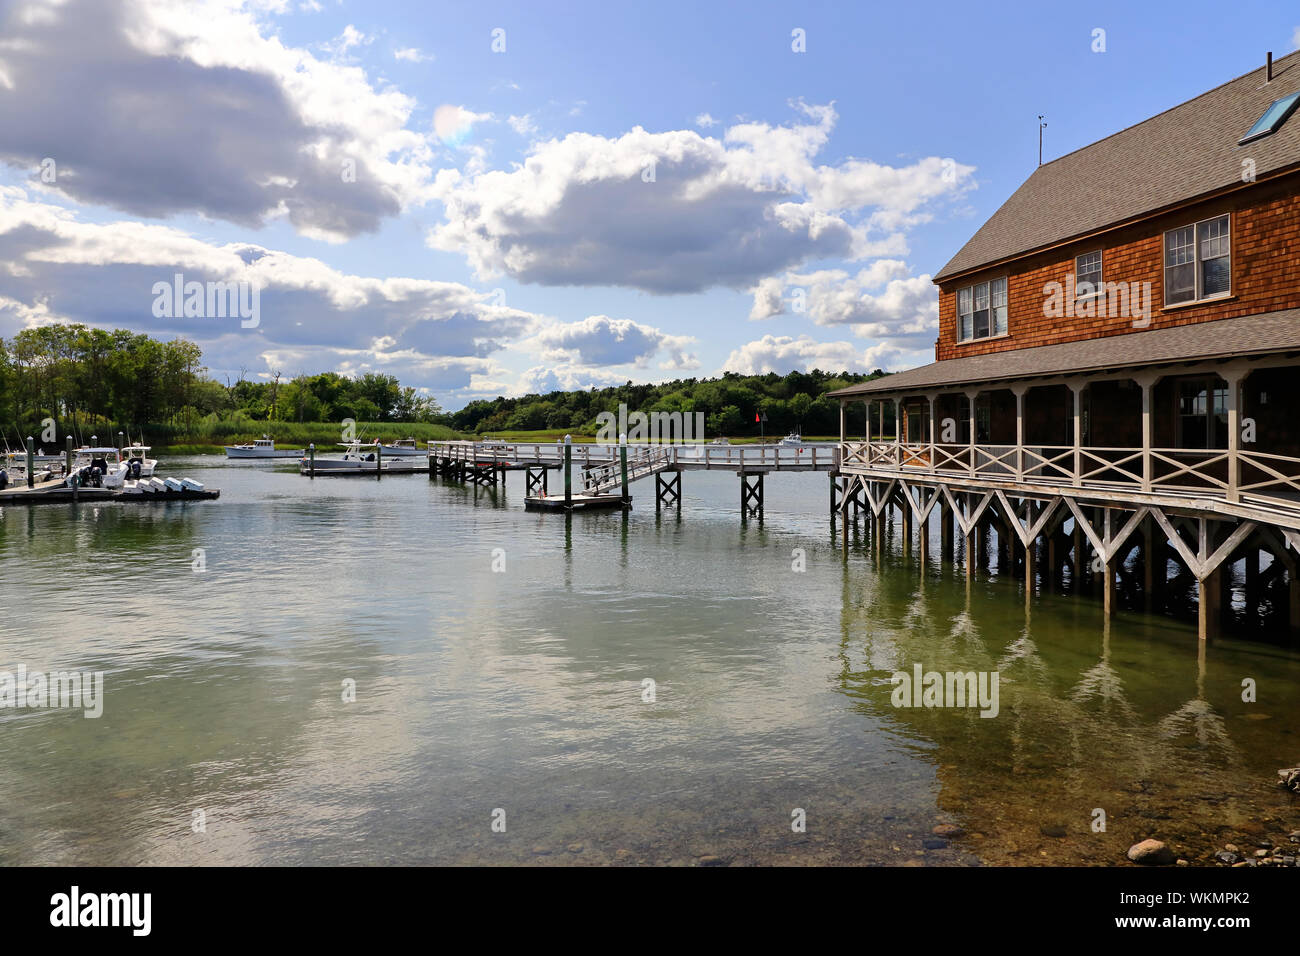 Recreational boats docking in the marina along Kennebunk River.Kennebunkport.Maine.USA Stock Photo